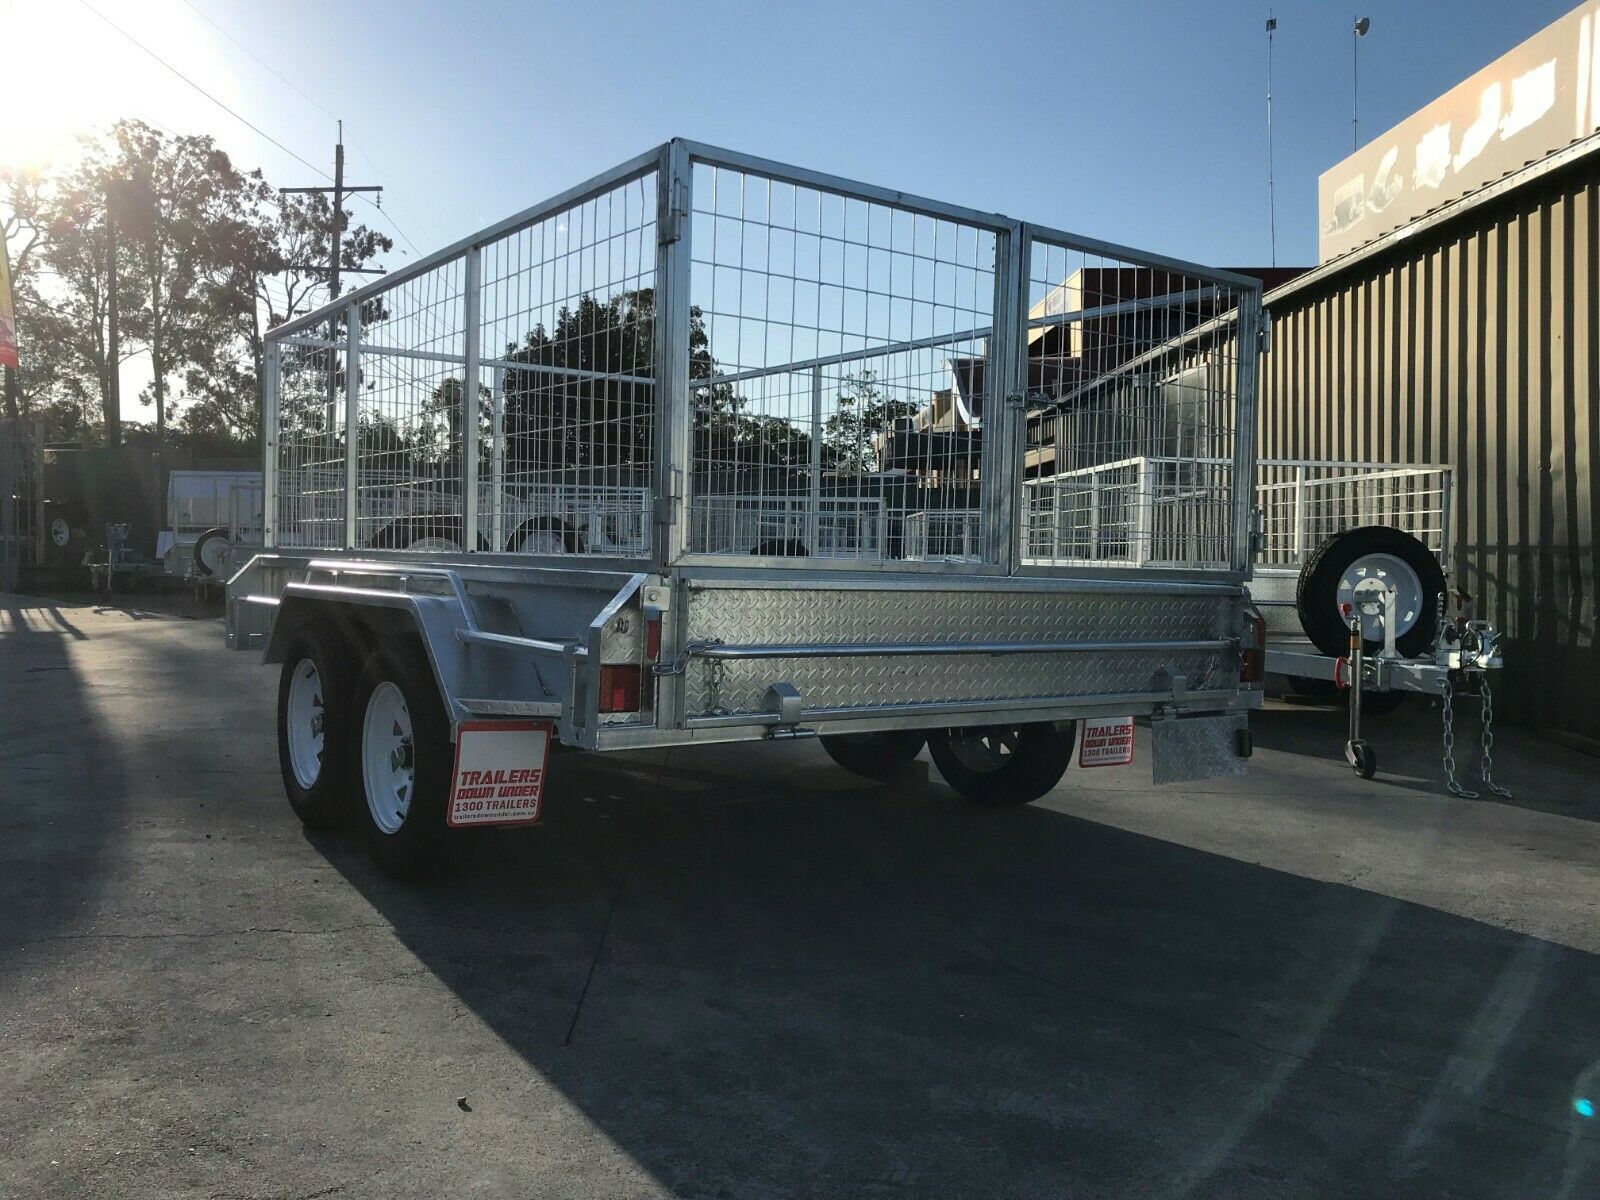 10×5 Galvanised Cage Trailer with 3 Ft Cage for Sale in Brisbane<br><br><span class="galv-import">Imported Trailer</span>